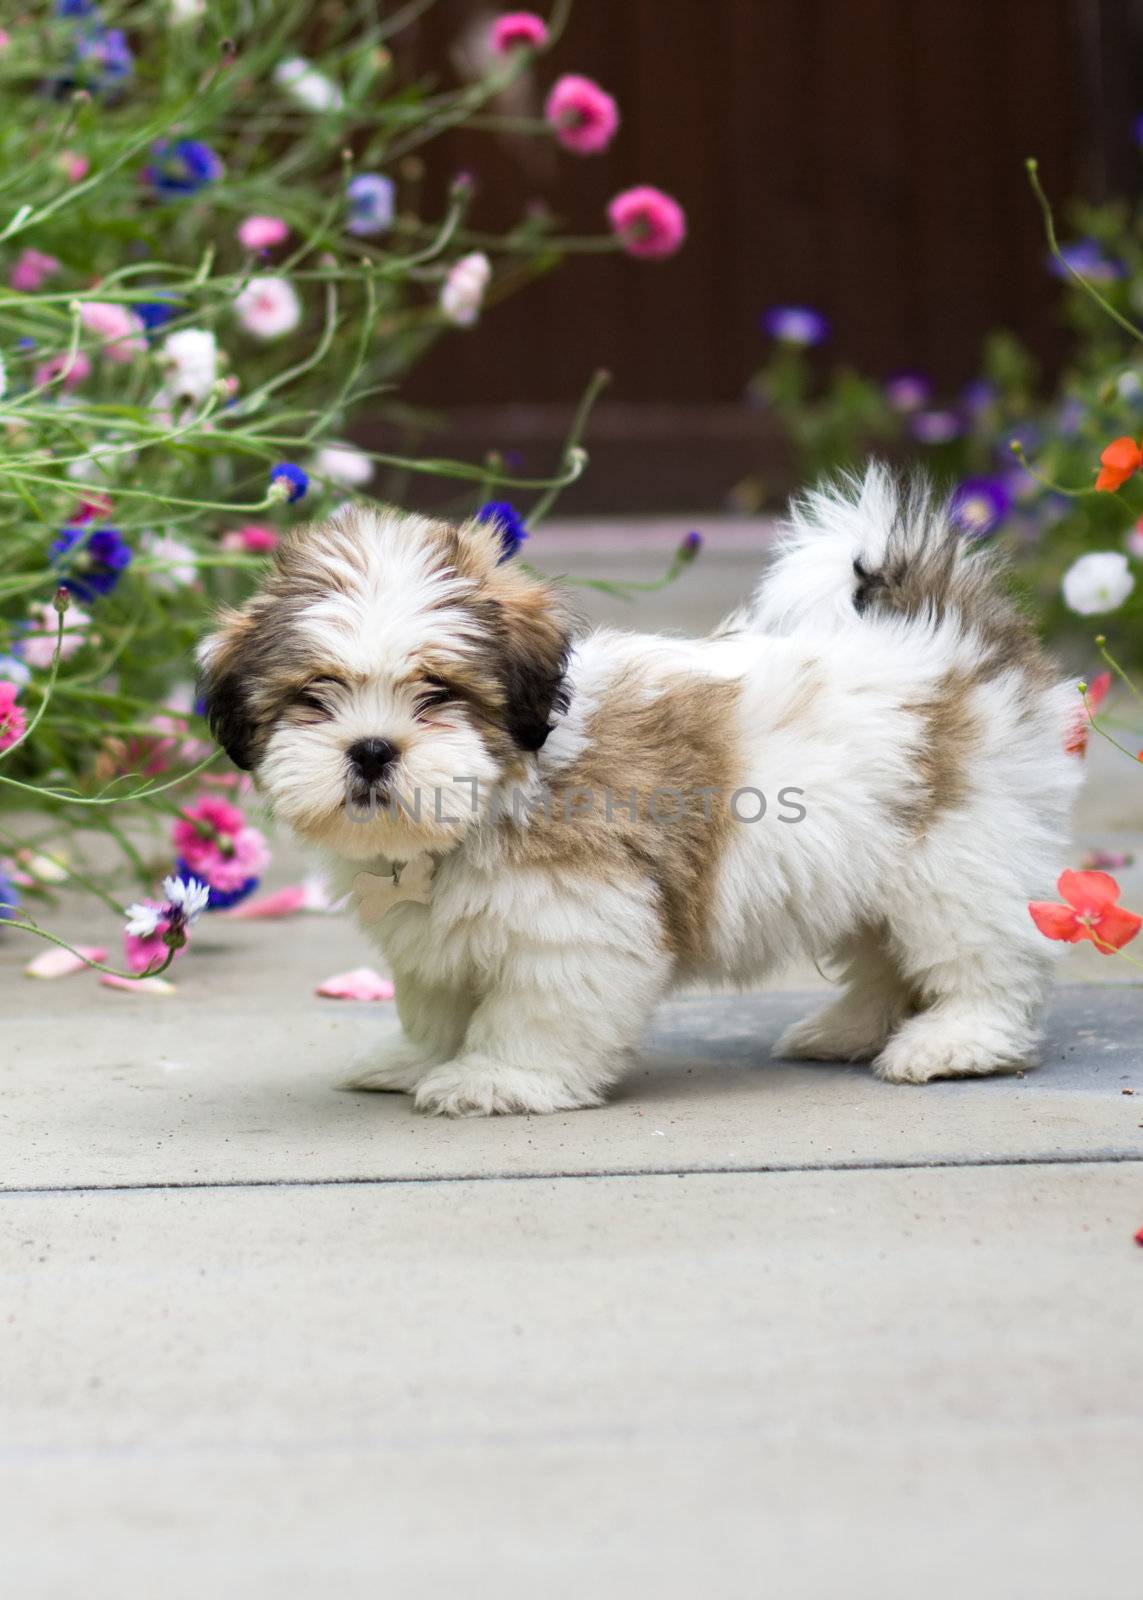 Cute lhasa apso puppy amongst poppies and cornflowers